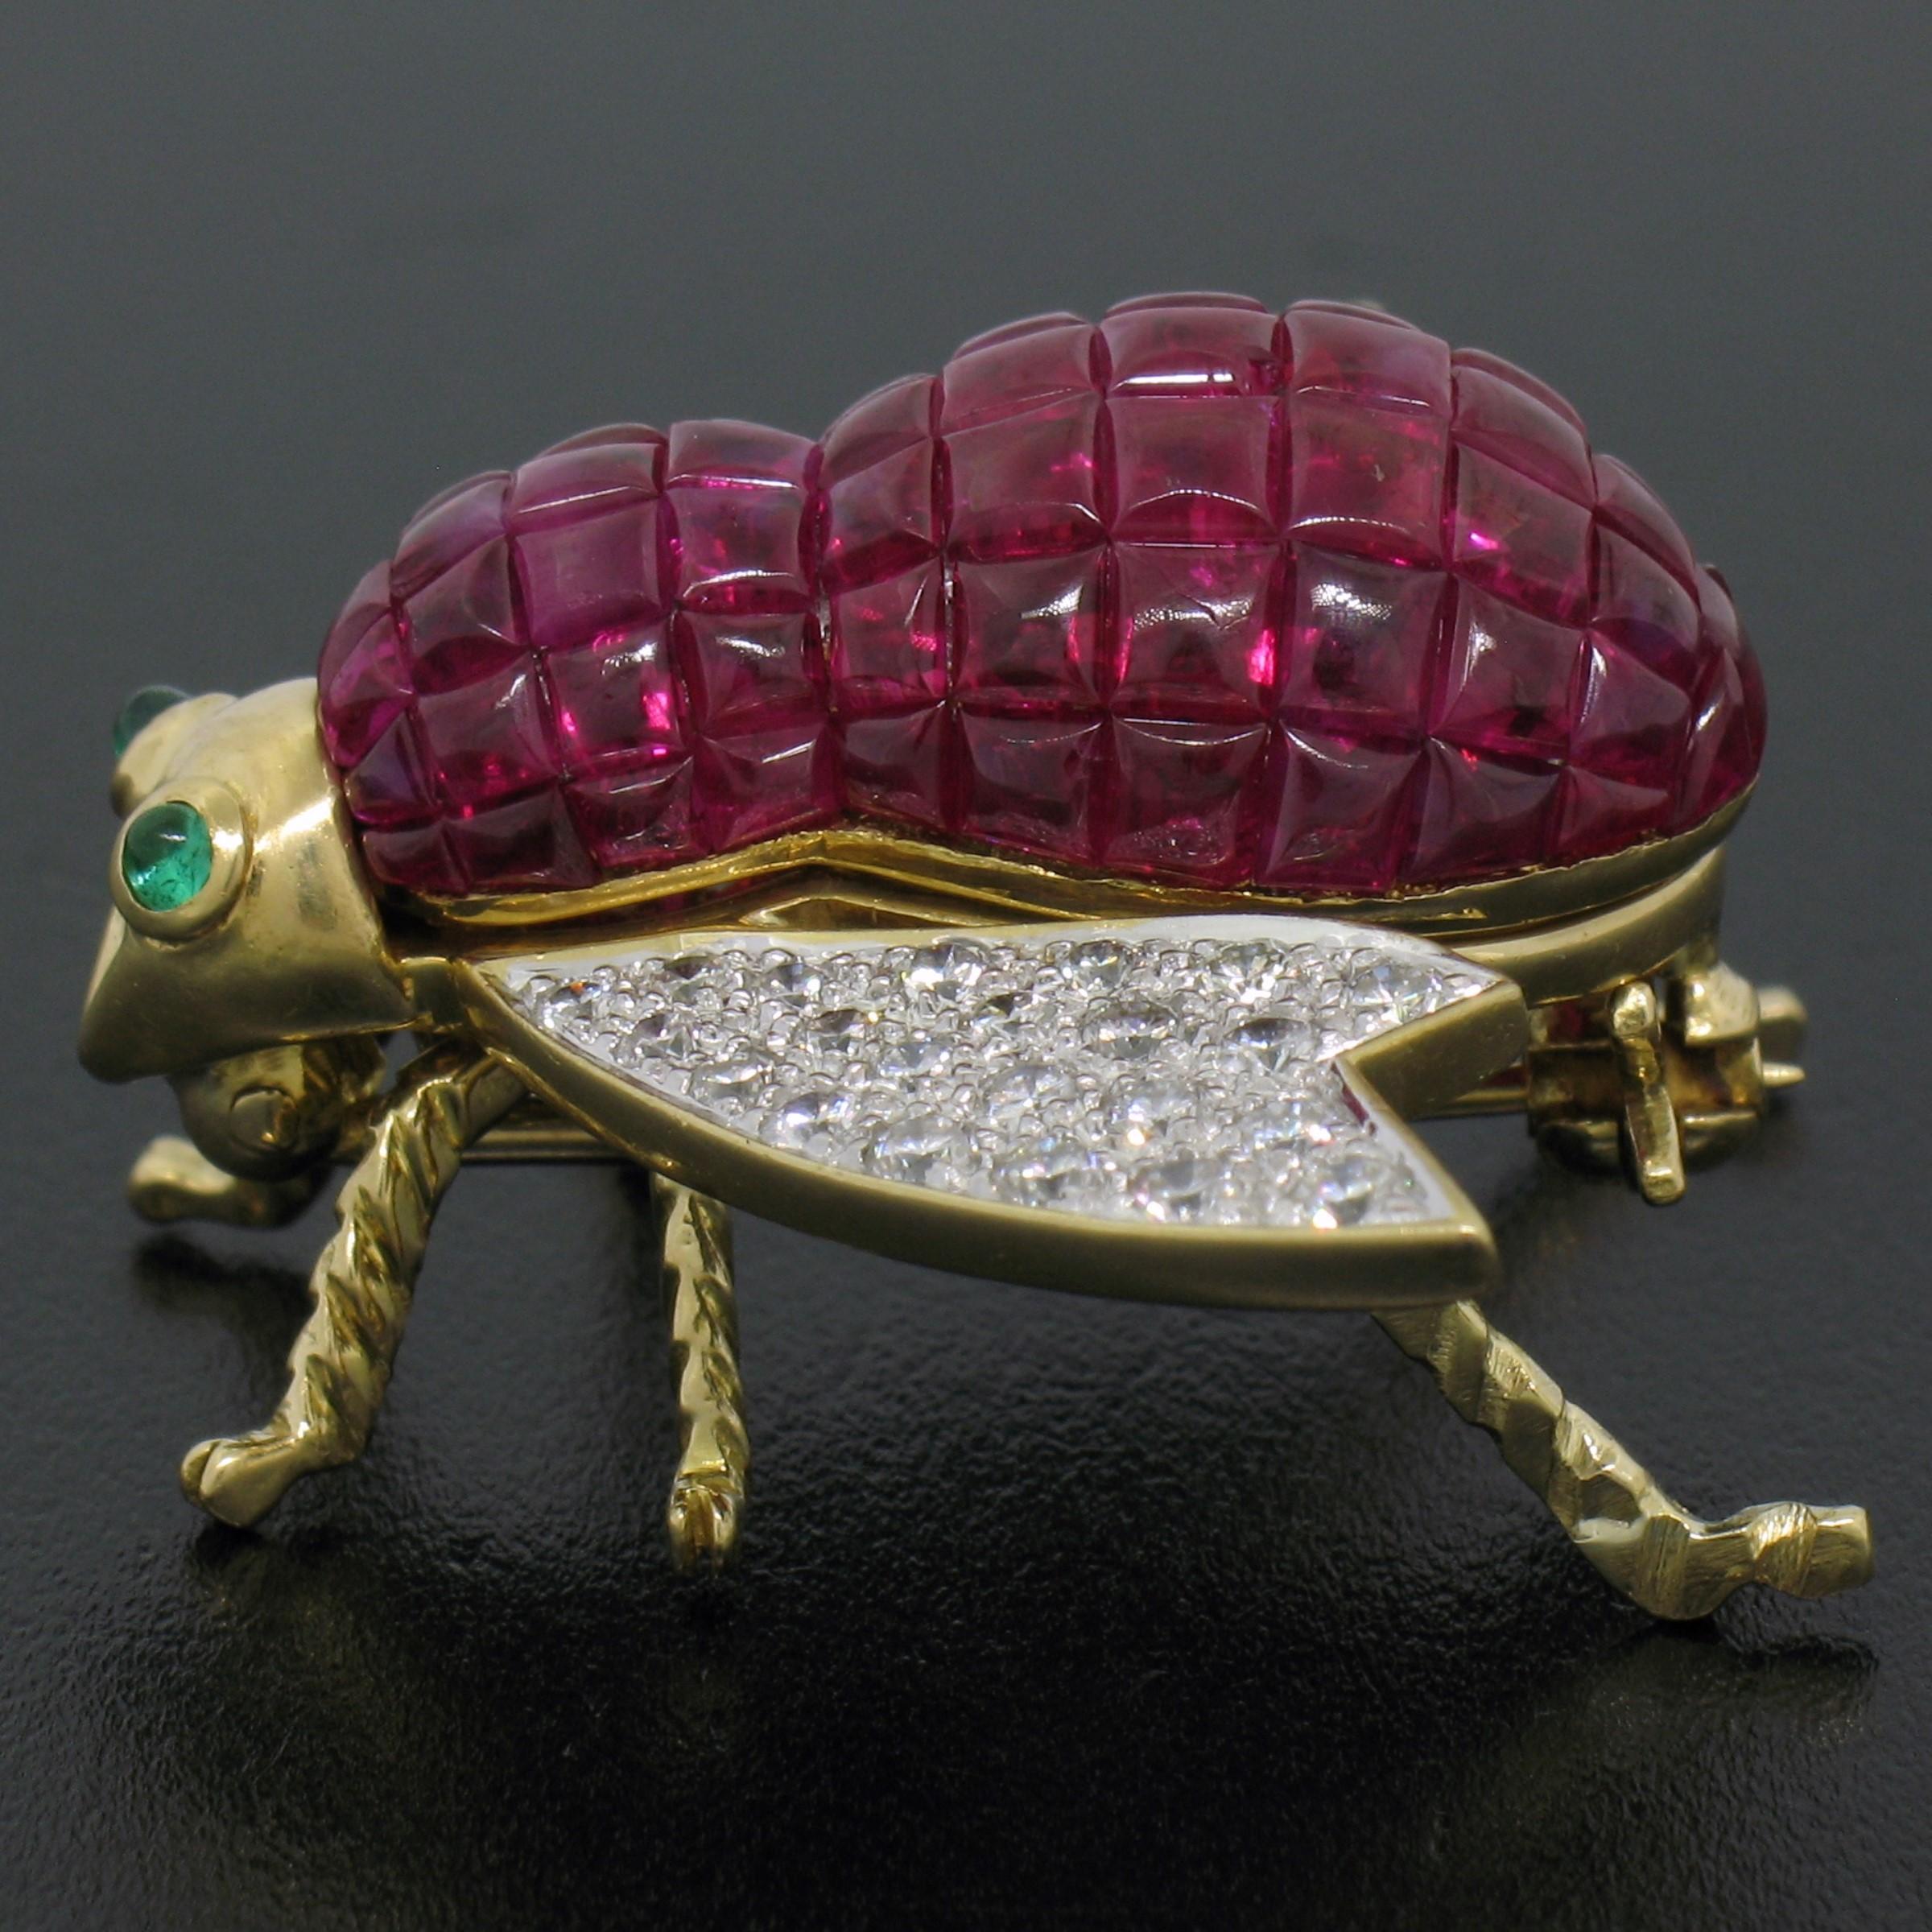 You are looking at a breathtakingly designed and very well-made brooch crafted in solid 18k yellow gold. The design features a large and lovely bee/fly covered with custom cut rubies throughout its body along with very fine quality round brilliant